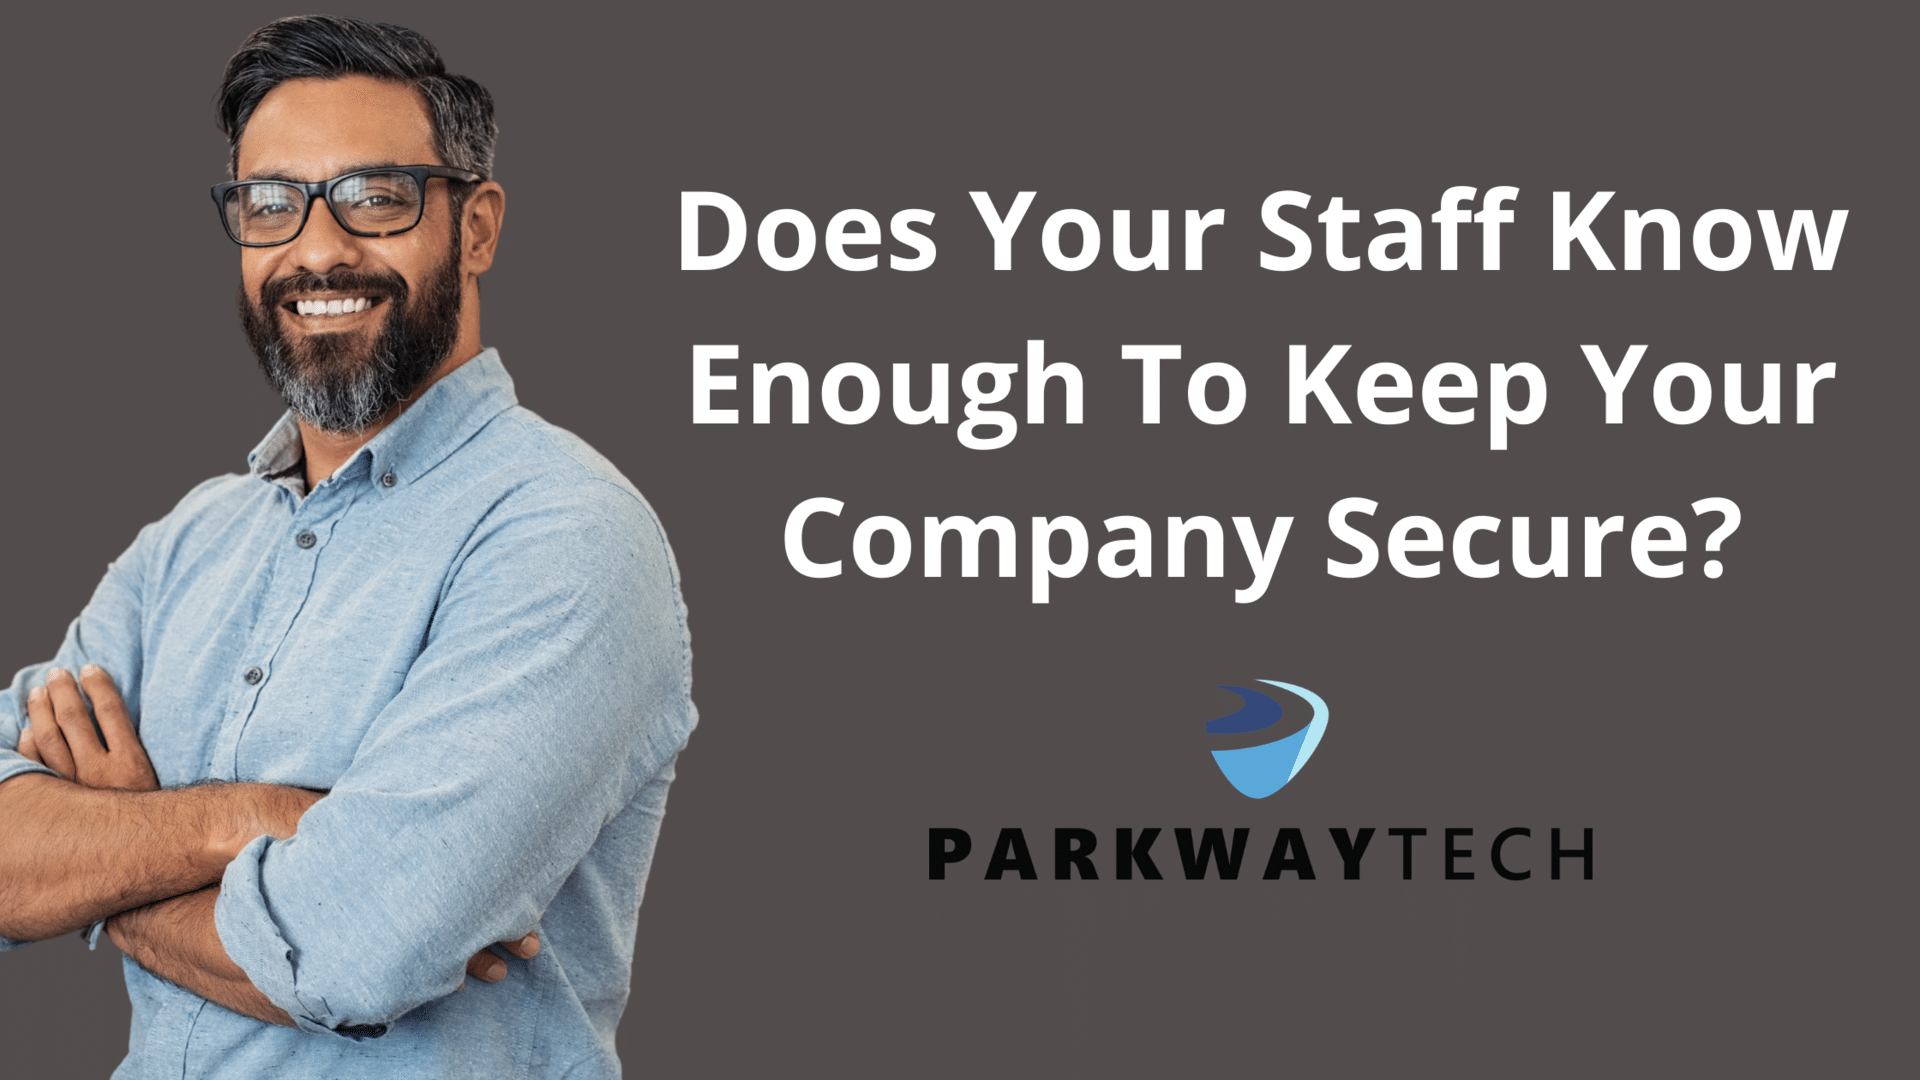 Does Your Staff Know Enough To Keep Your Company Secure?